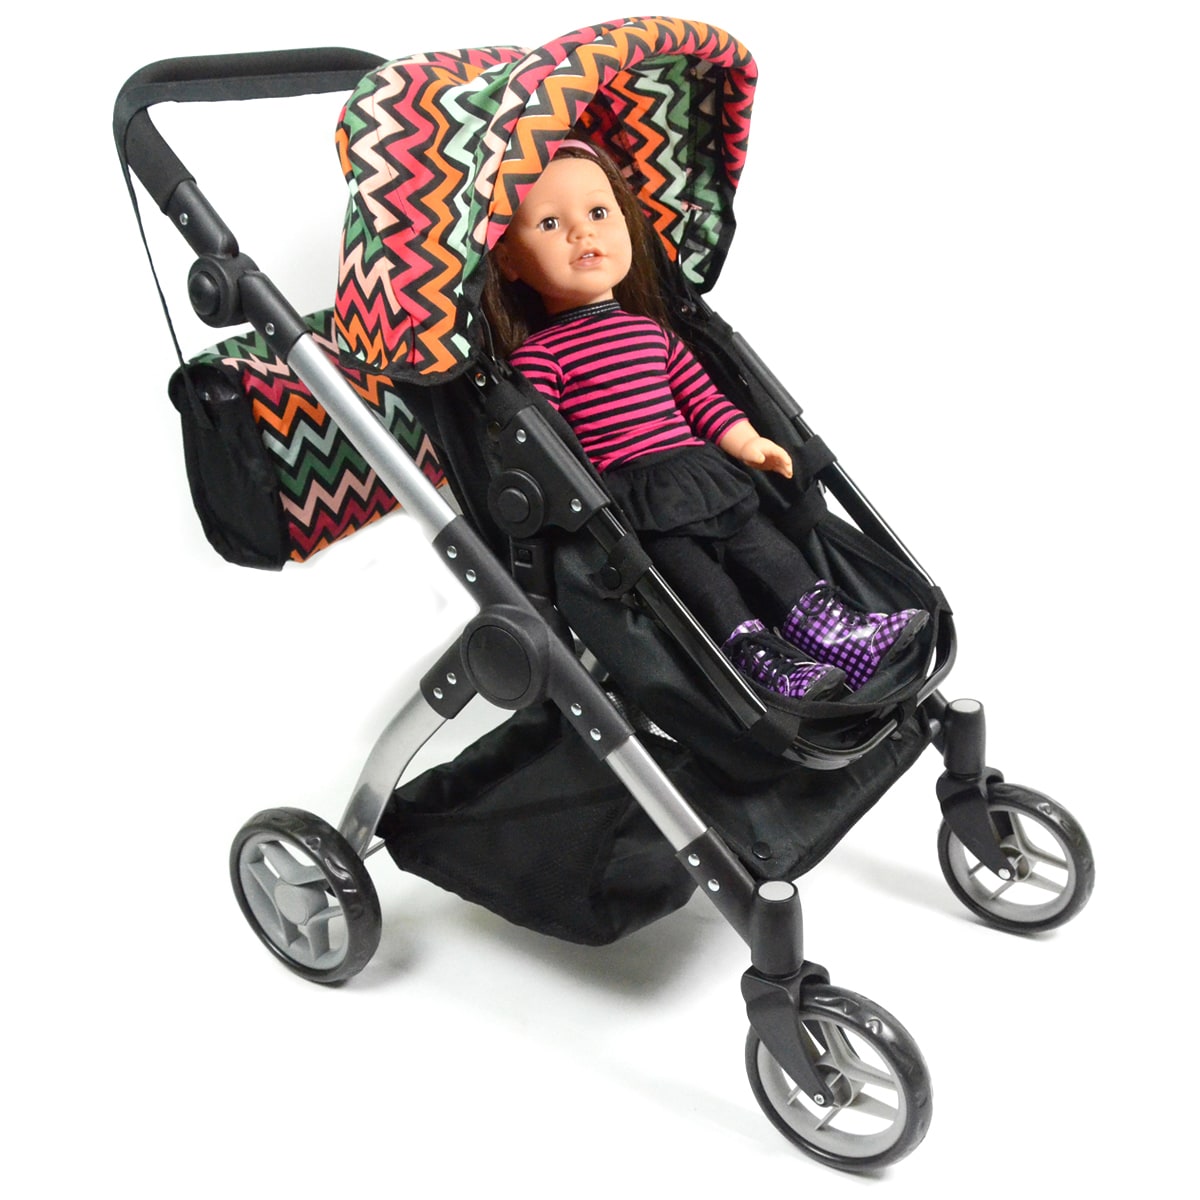 The New York Doll Collection 2 in 1 Convertible Babyboo Doll Stroller